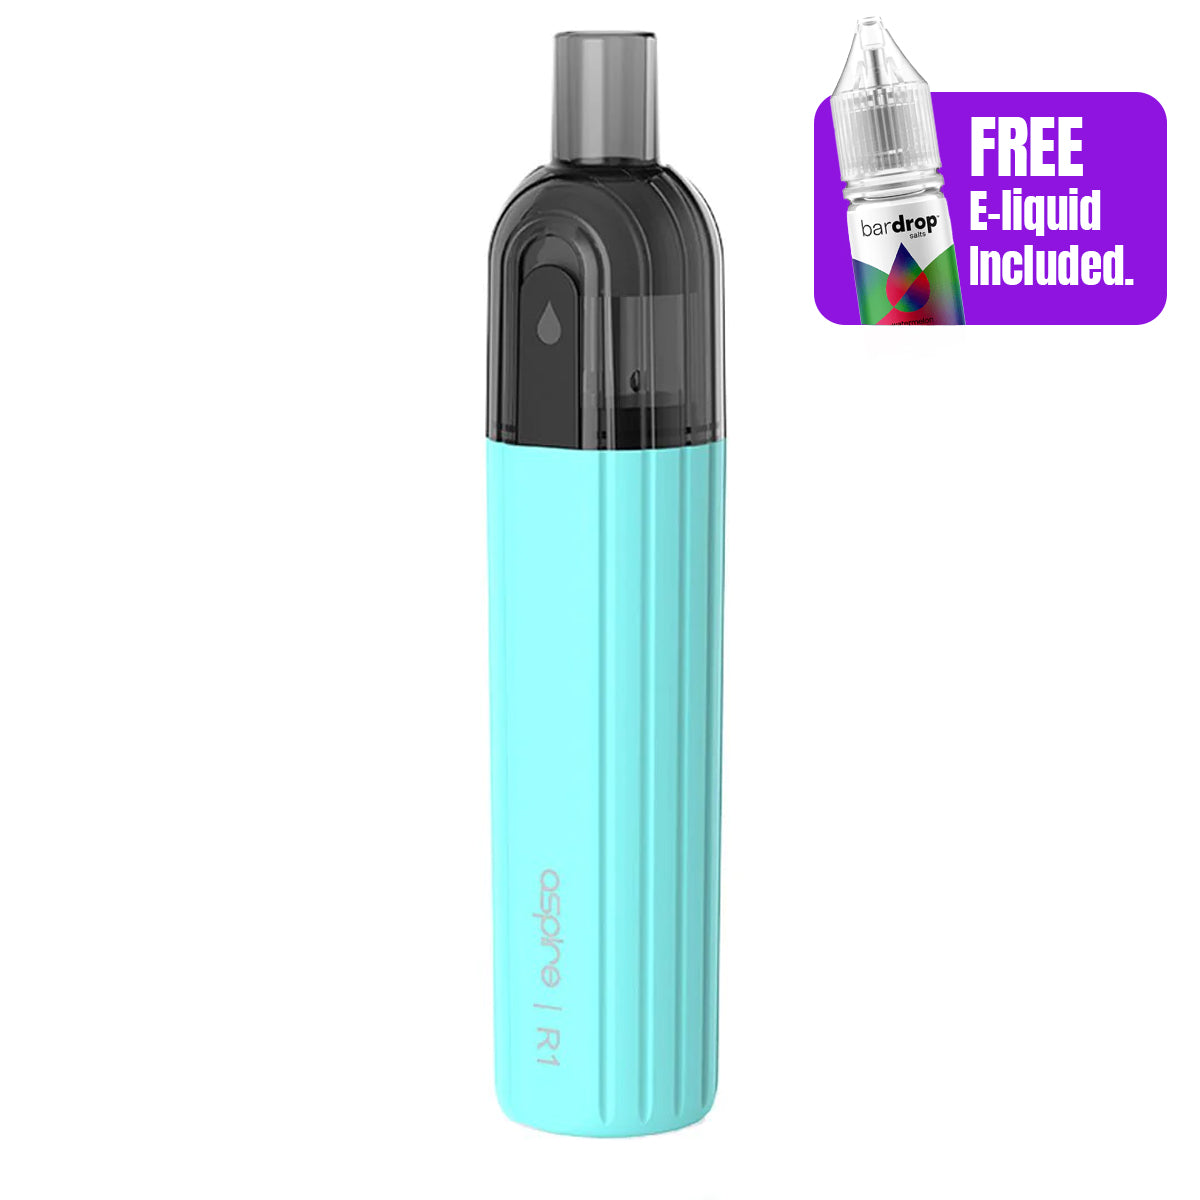 R1 One Up Refillable Disposable Vape By Aspire